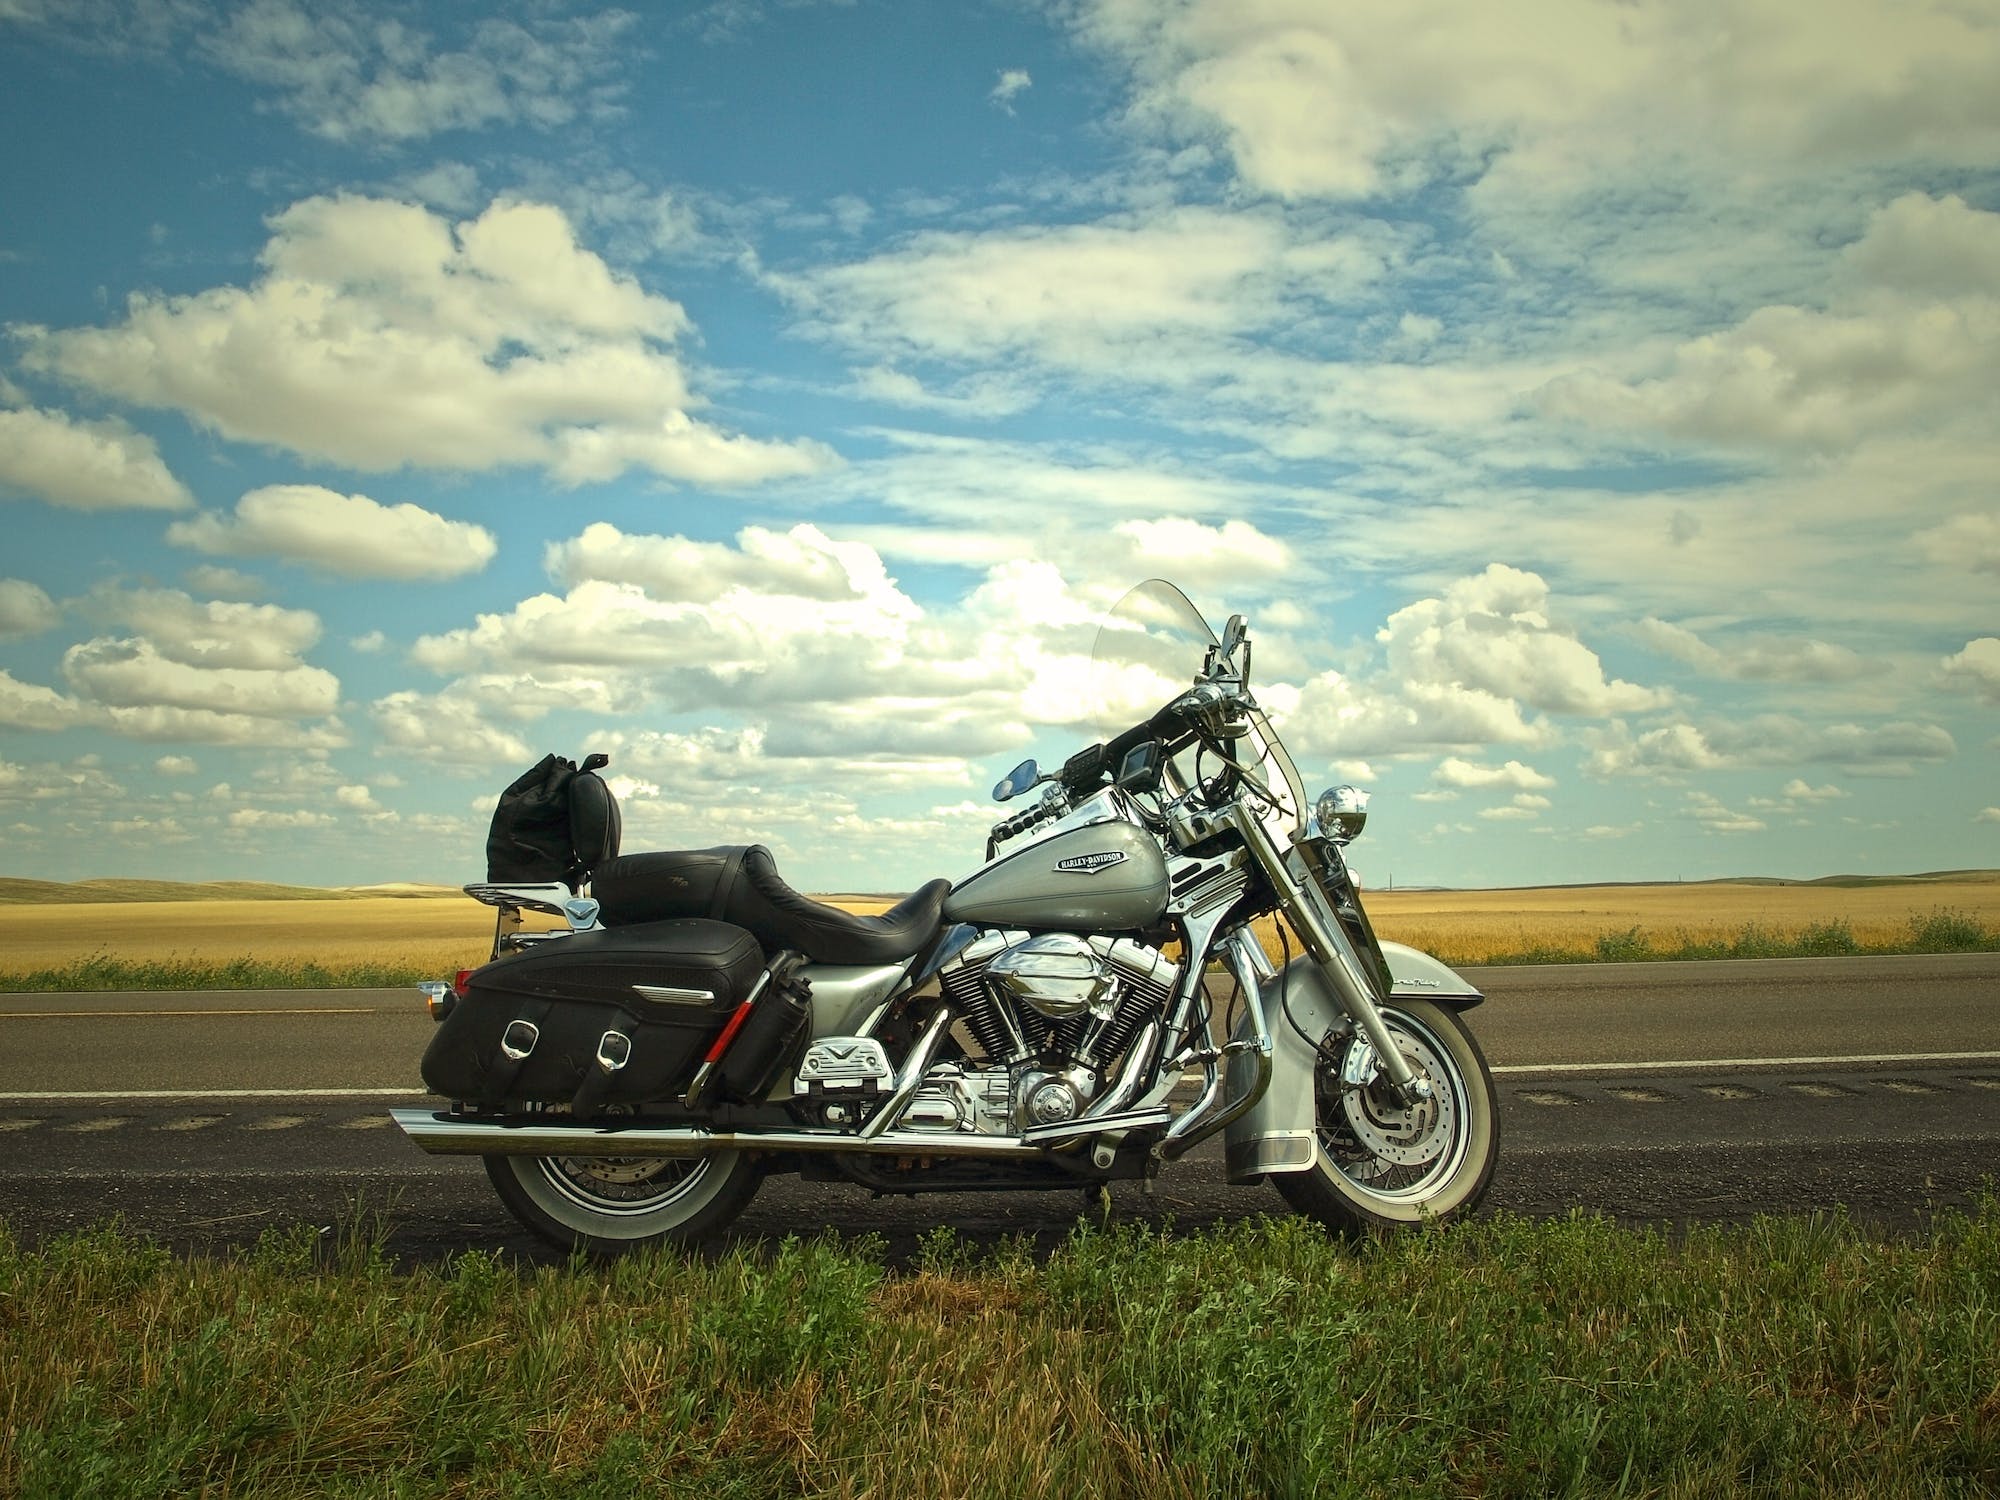 A gray and silver cruiser motorcycle parked on the side of a road near a green grass field.